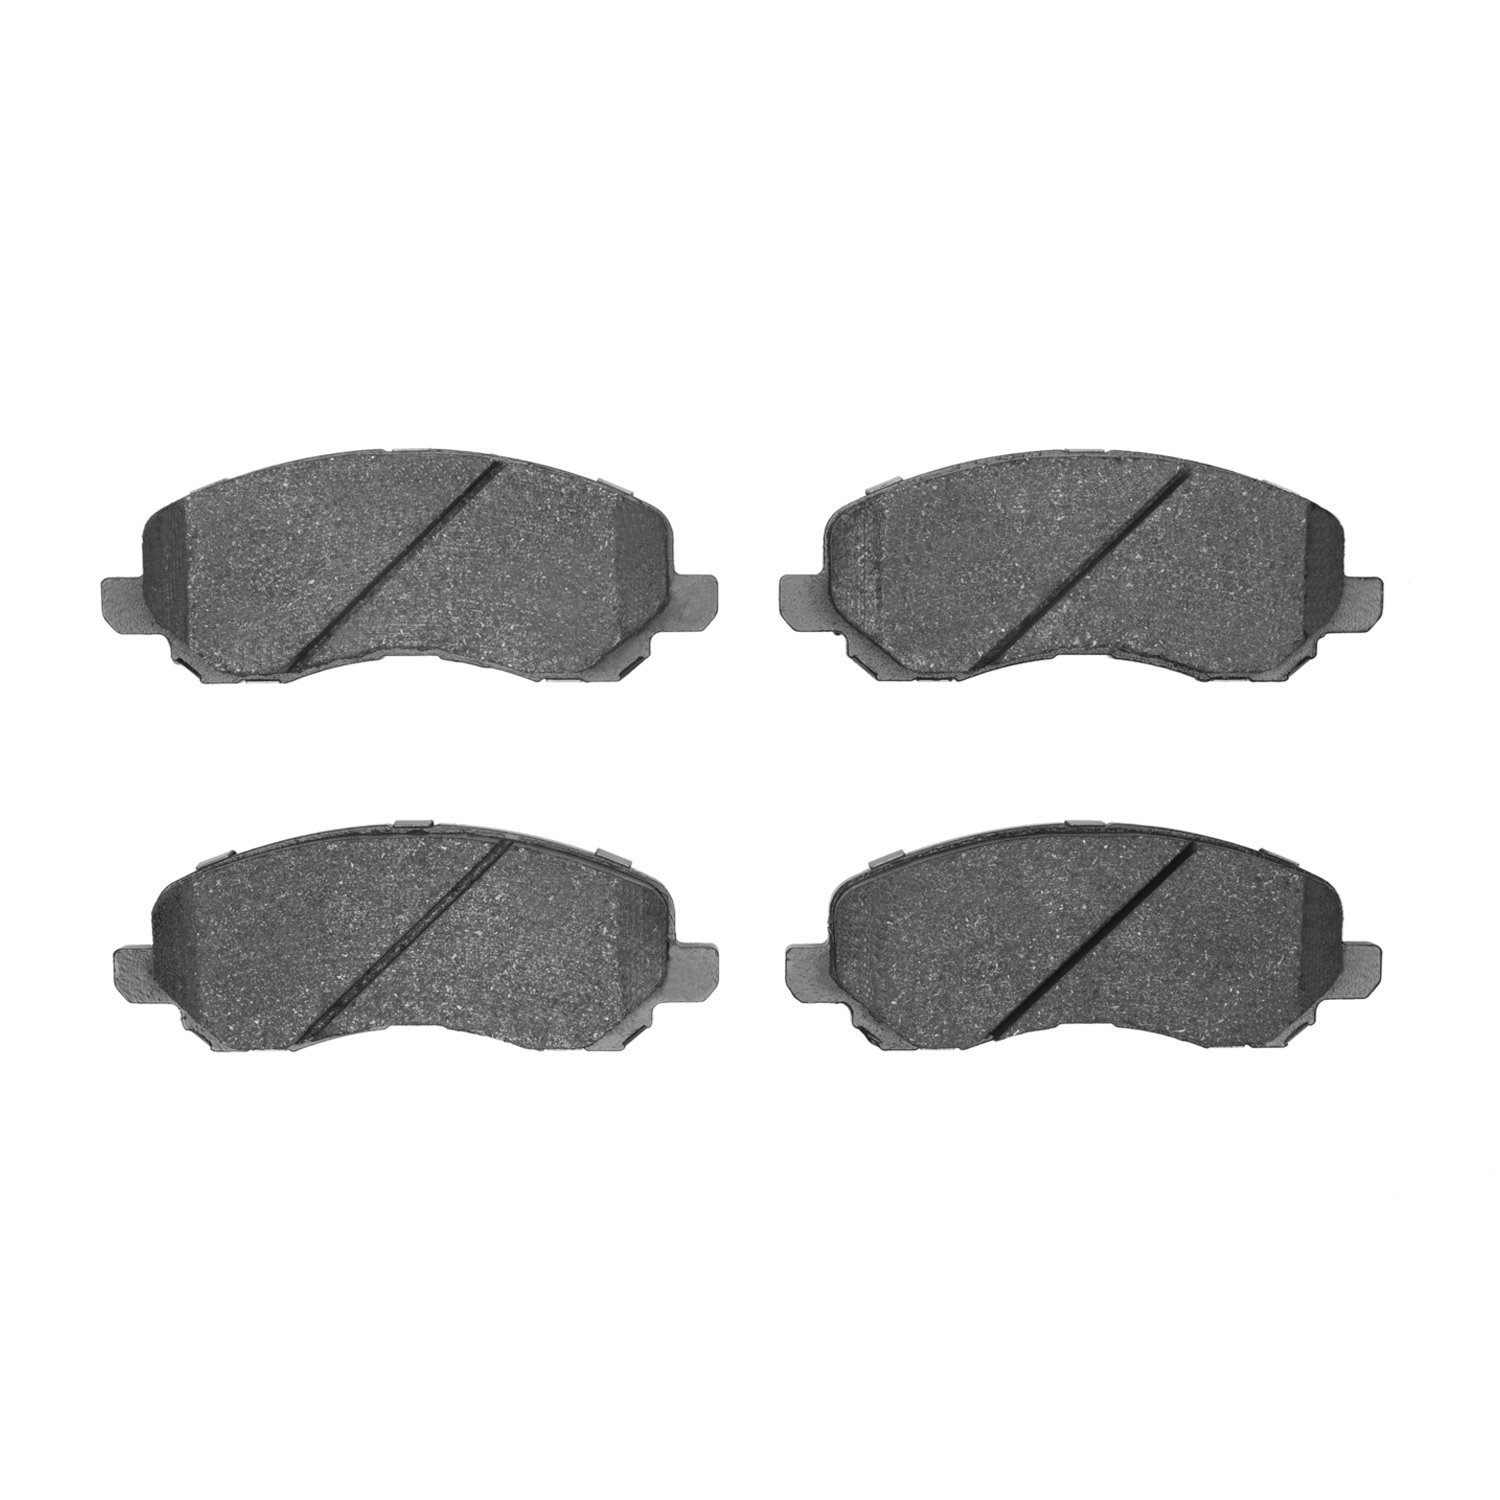 1310-0866-00 3000-Series Ceramic Brake Pads, Fits Select Multiple Makes/Models, Position: Front